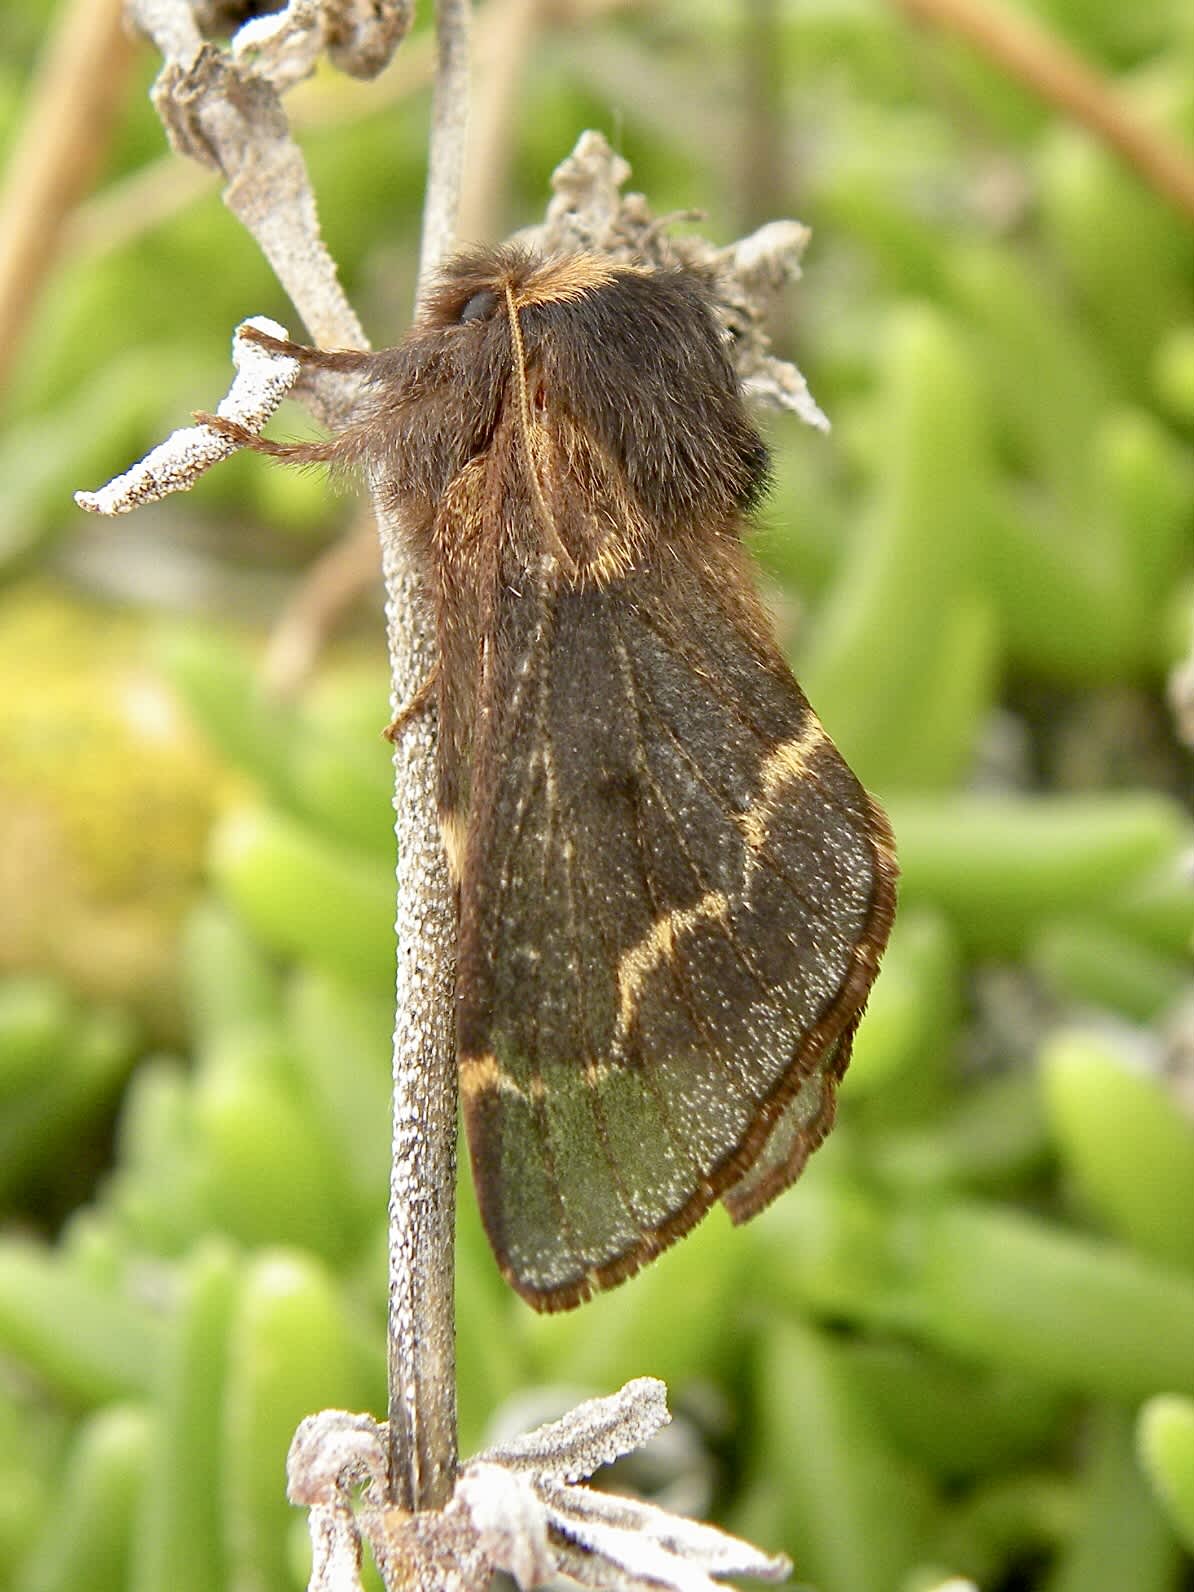 December Moth (Poecilocampa populi) photographed in Somerset by Sue Davies